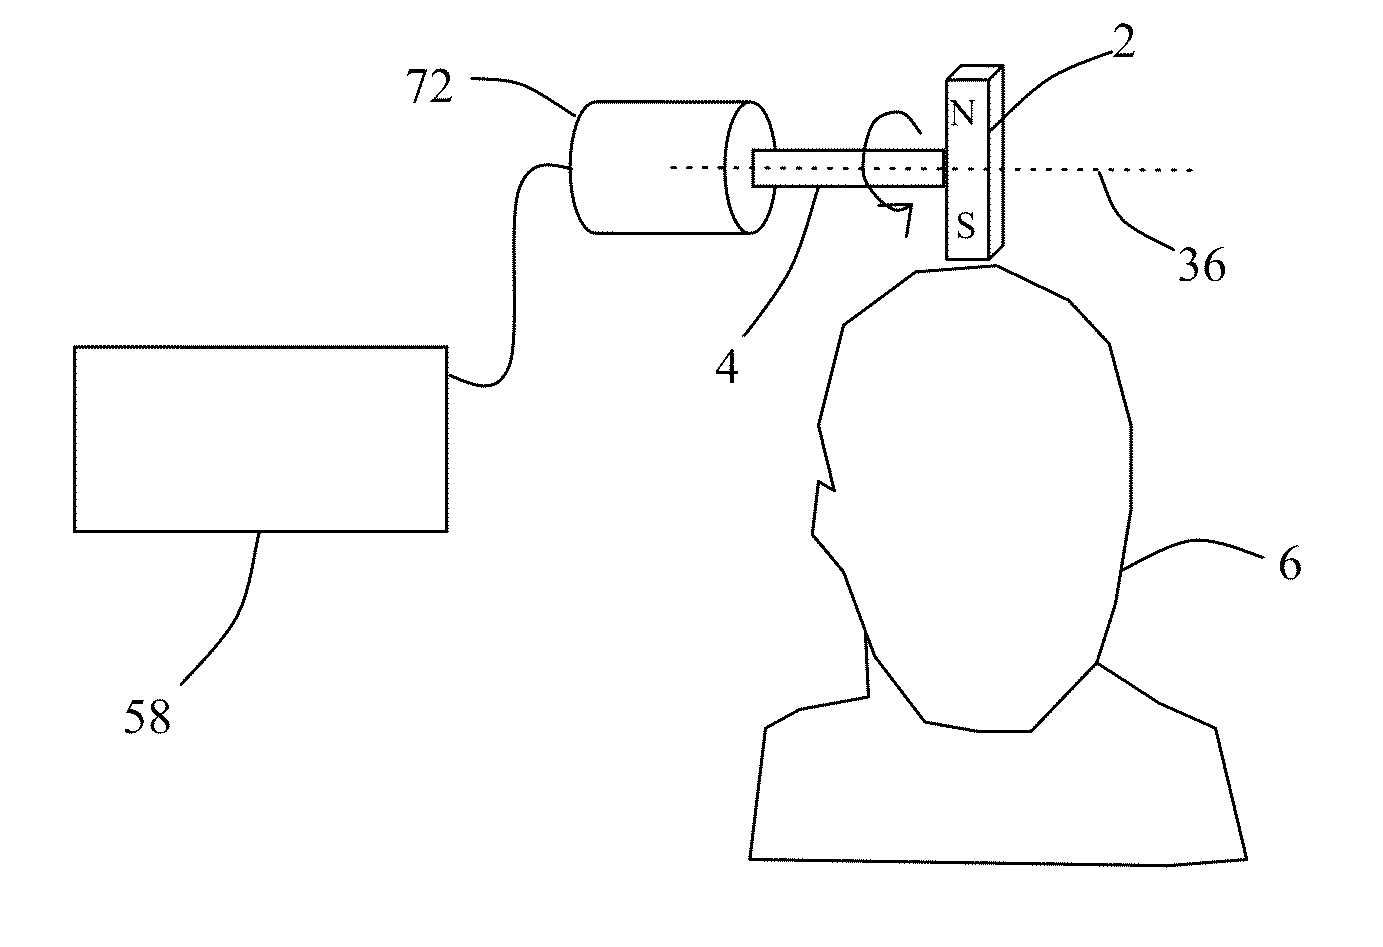 Systems and methods for modulating the electrical activity of a brain using neuro-EEG synchronization therapy